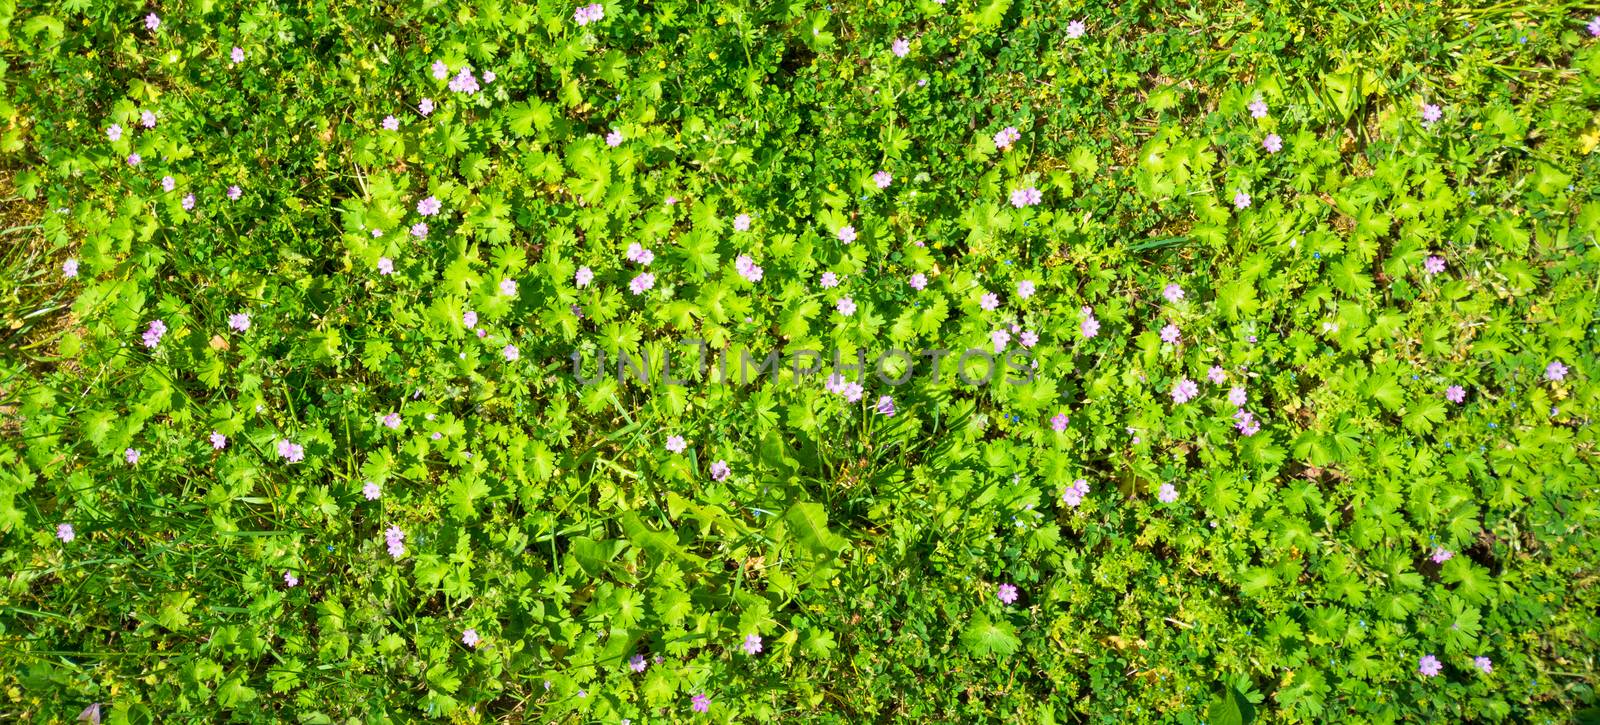 Texture of green bushes with small pink and blue flowers